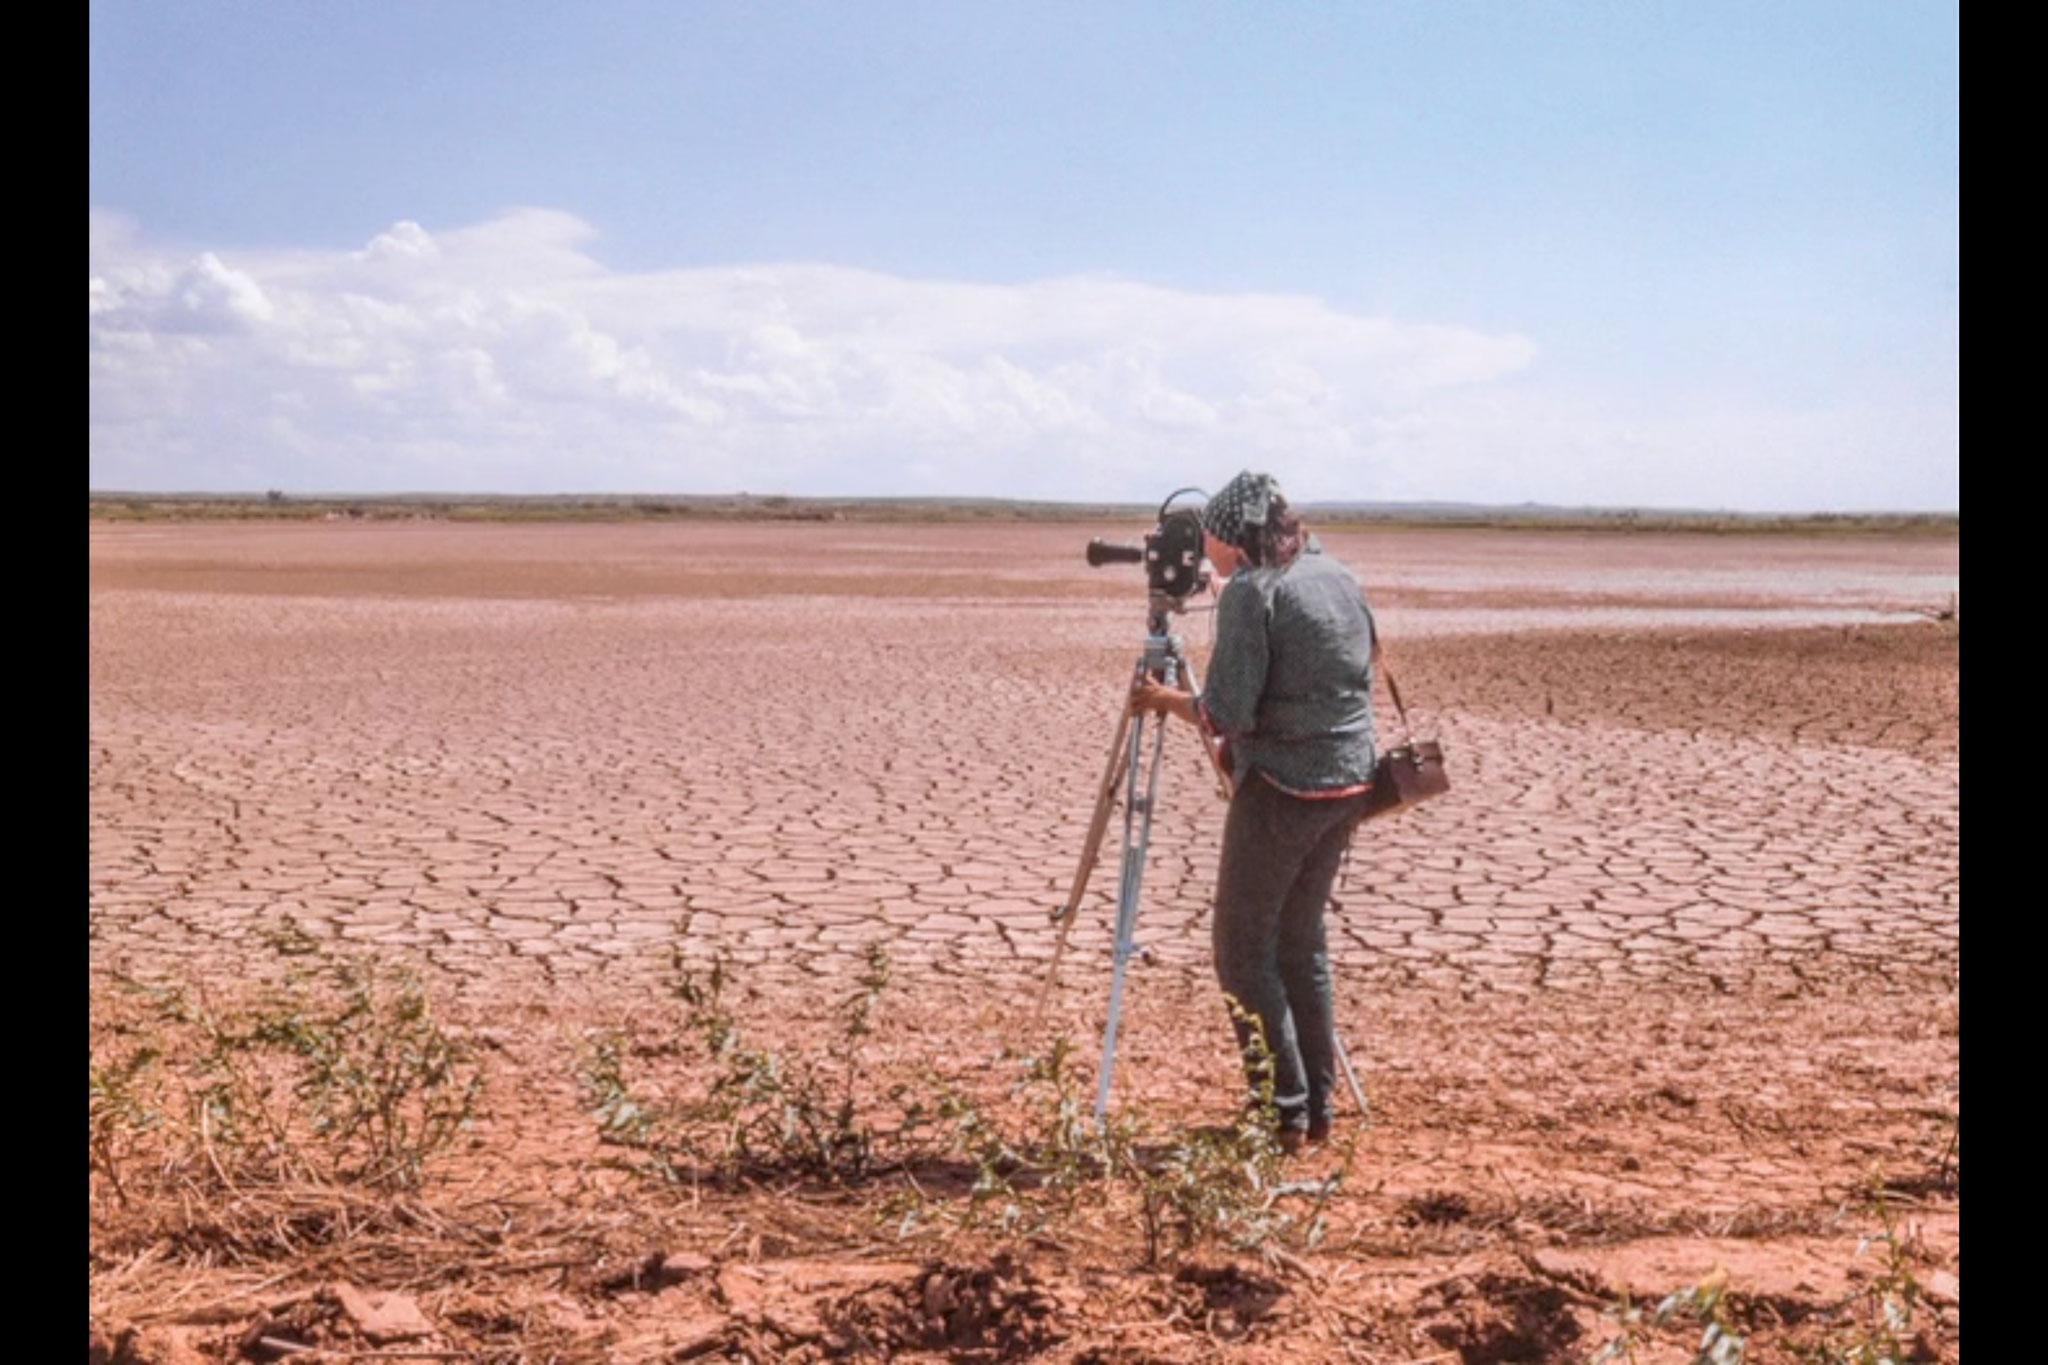 A woman standing next to a film camera and tripod on the edge of a dry lakebed.